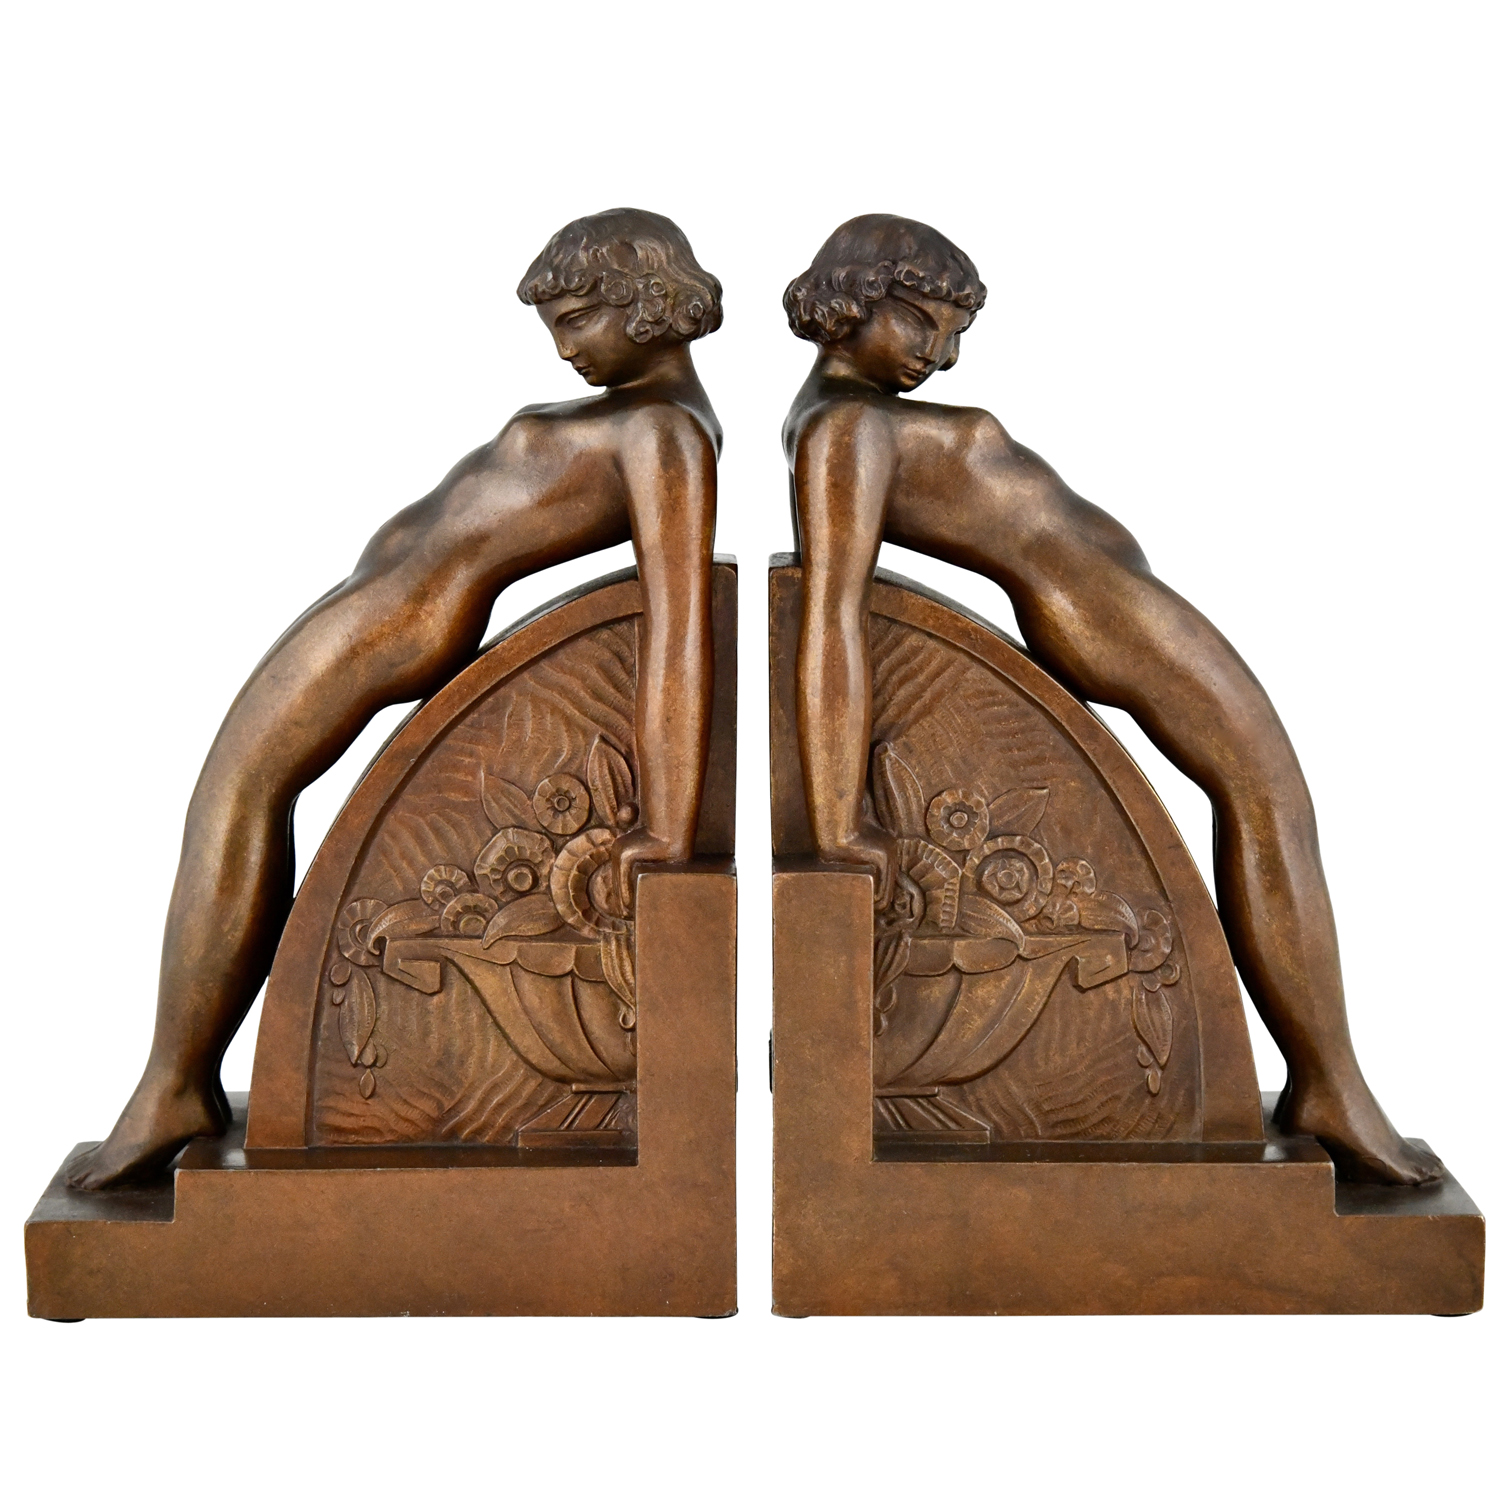 Art Deco bookends with nudes - Deconamic.